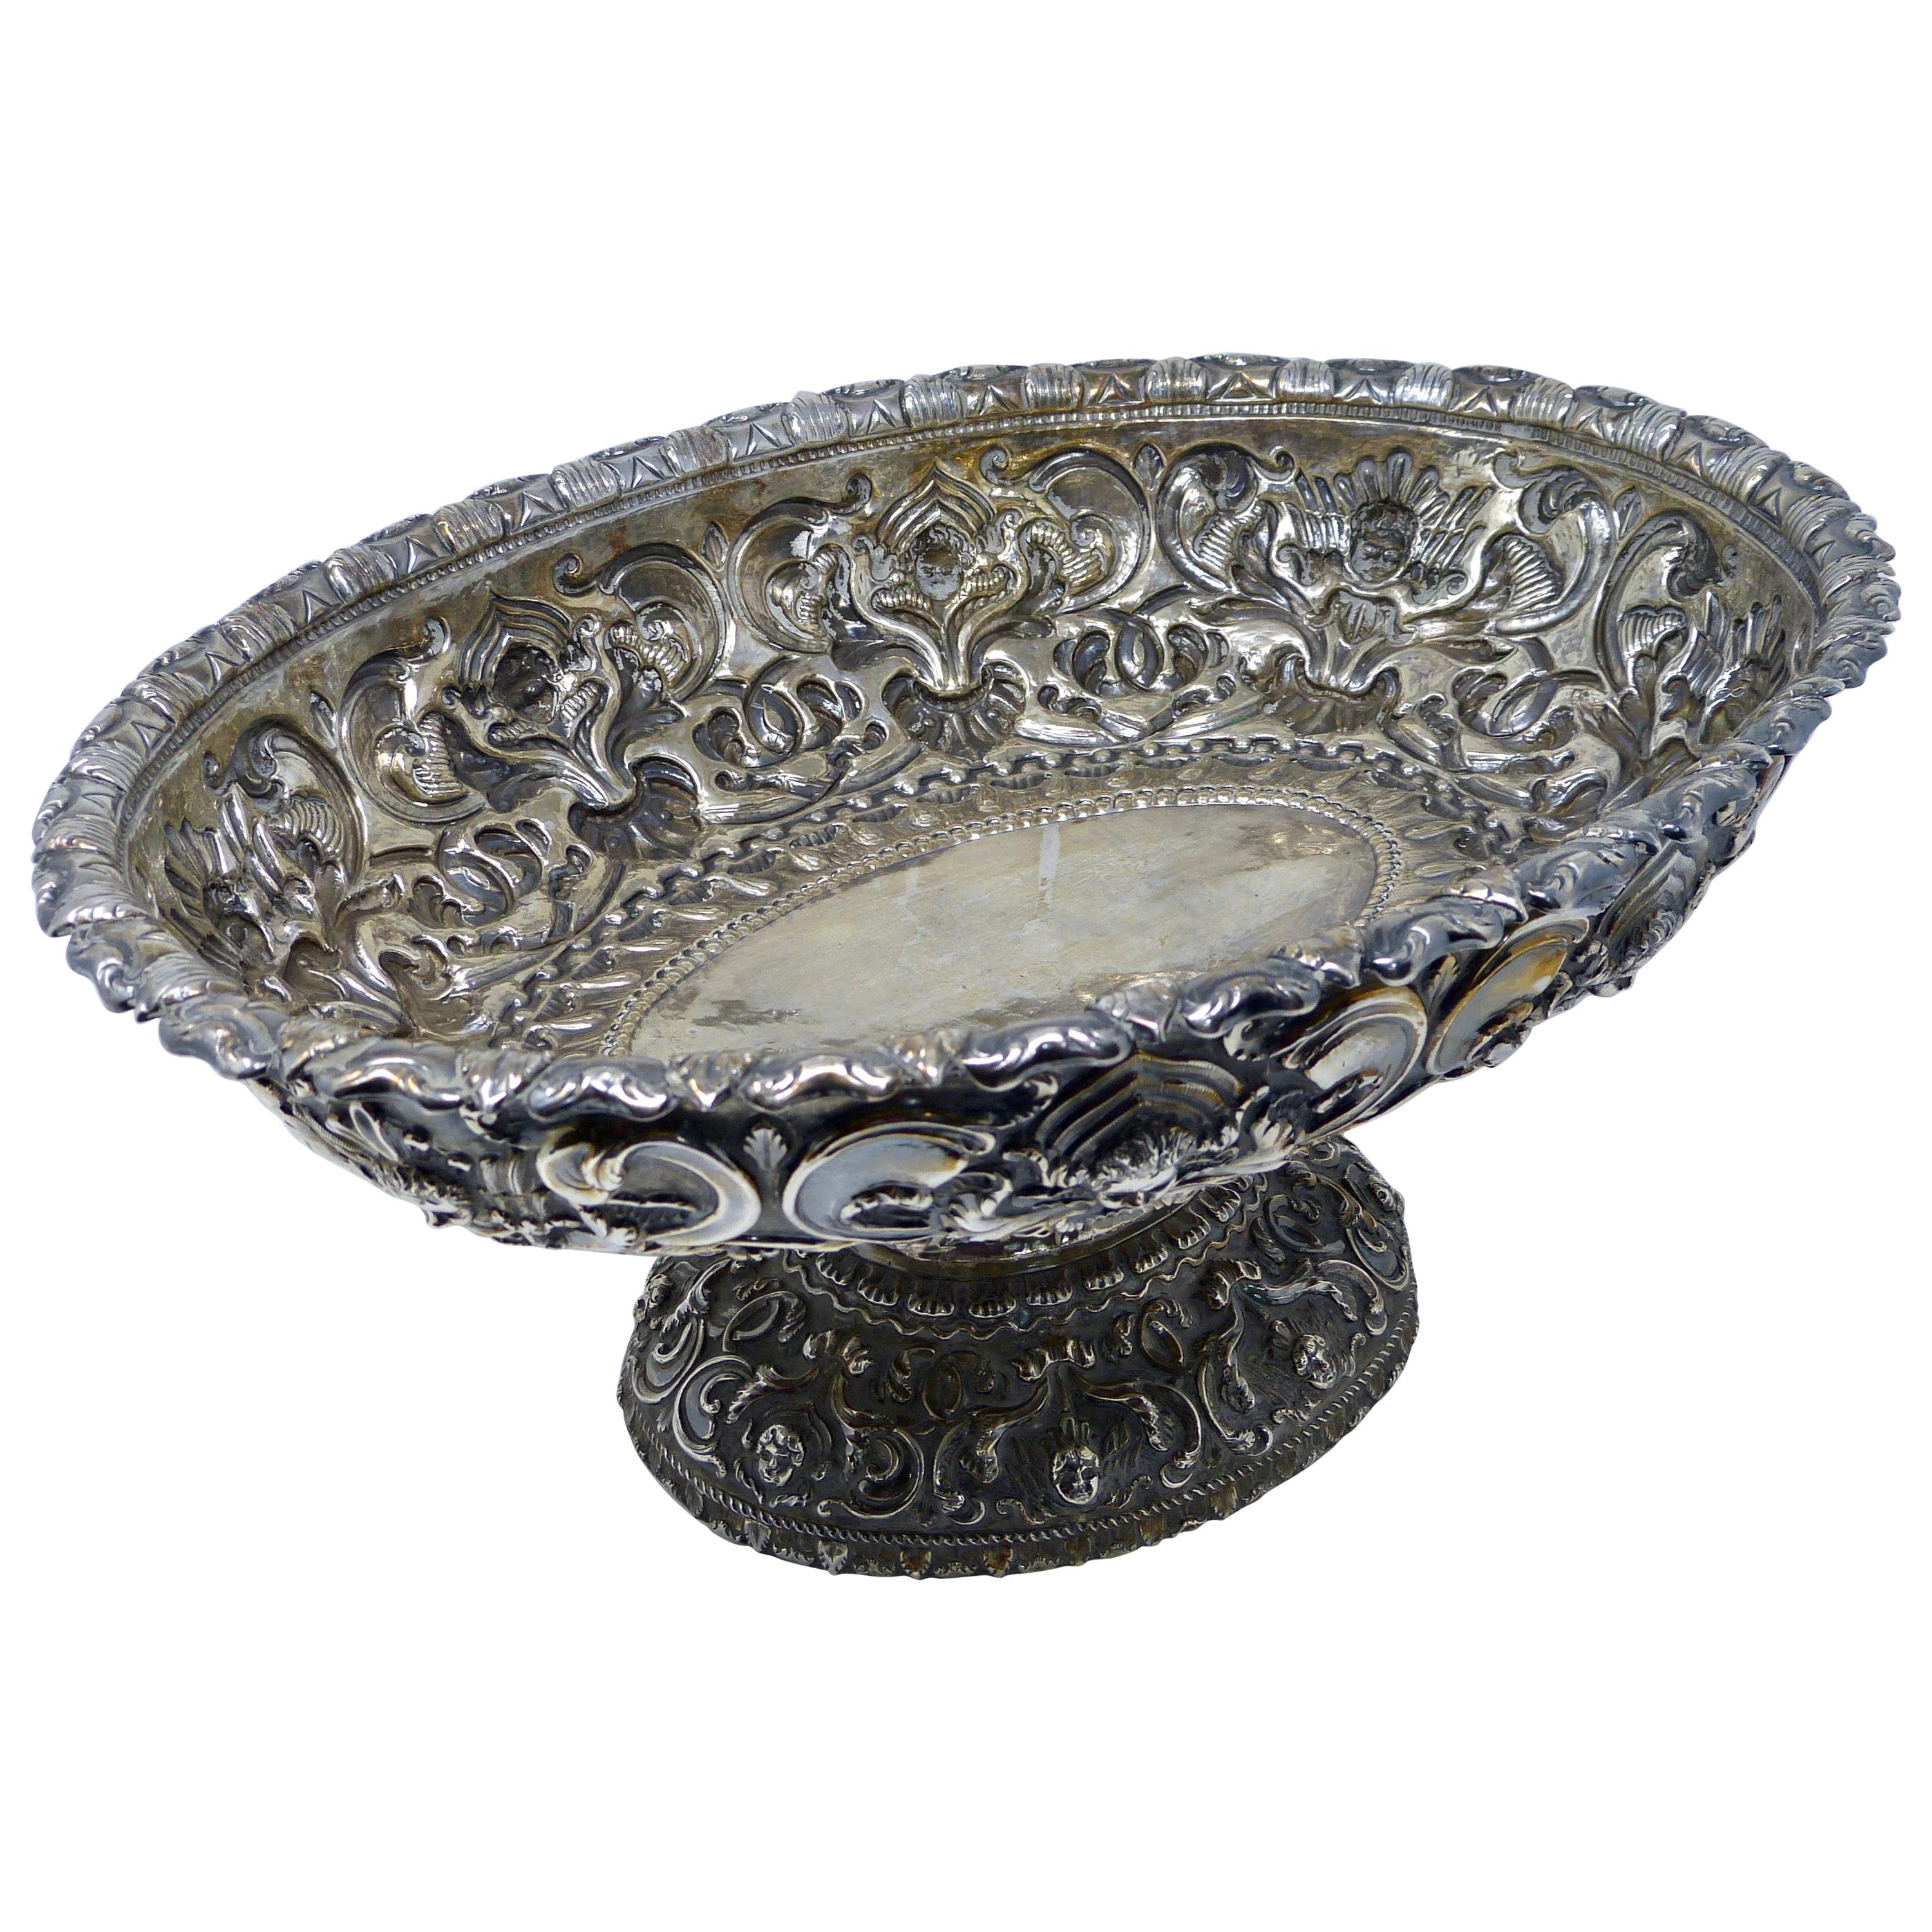 Spanish Colonial Style Sterling Silver Centerpiece Dish Vase with Cherubs 0.925 For Sale